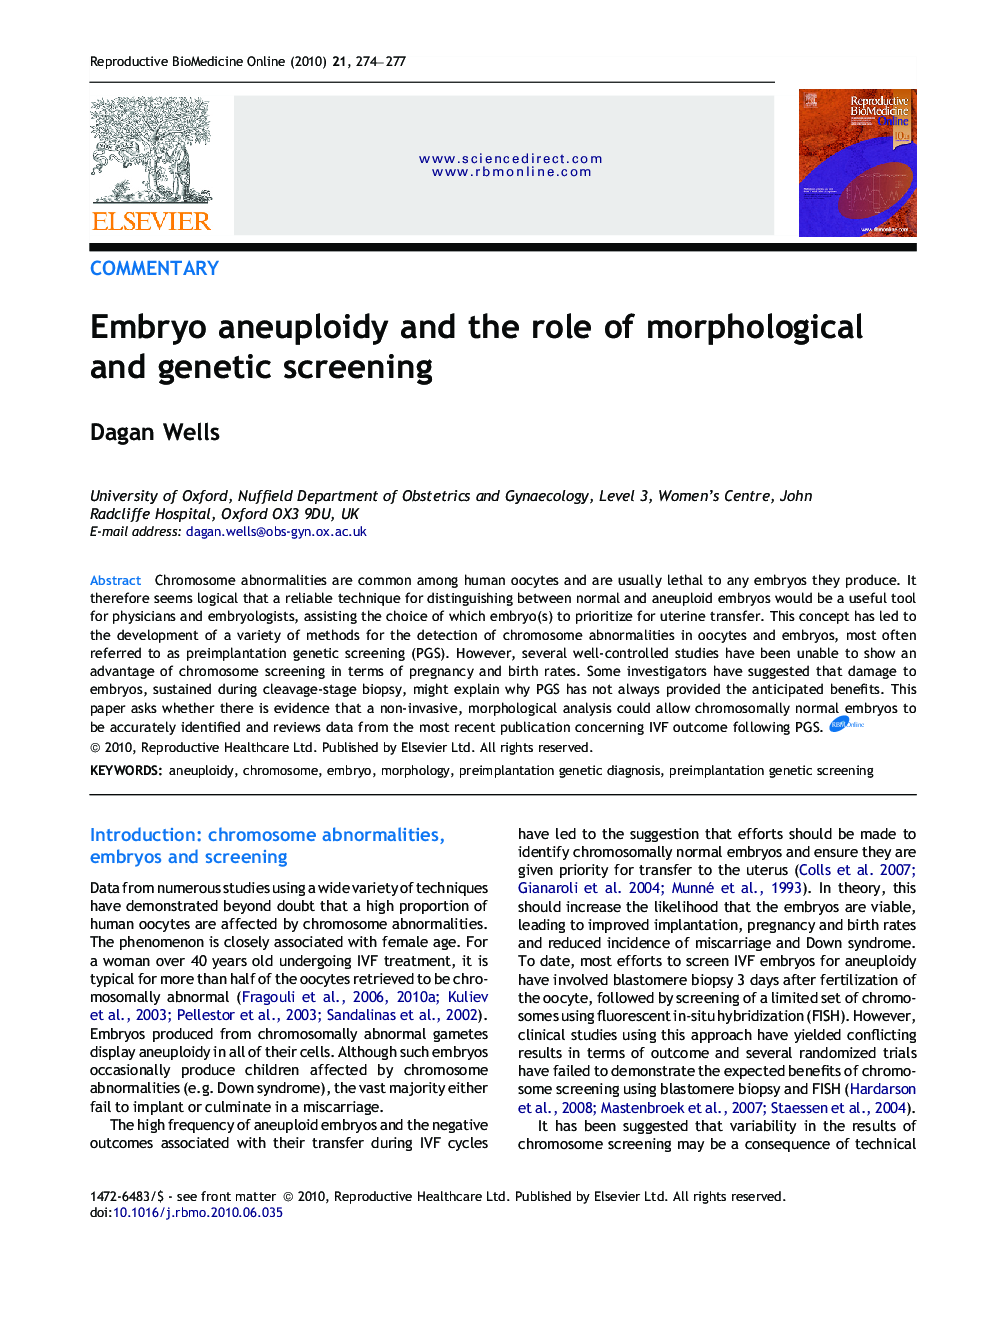 Embryo aneuploidy and the role of morphological and genetic screening